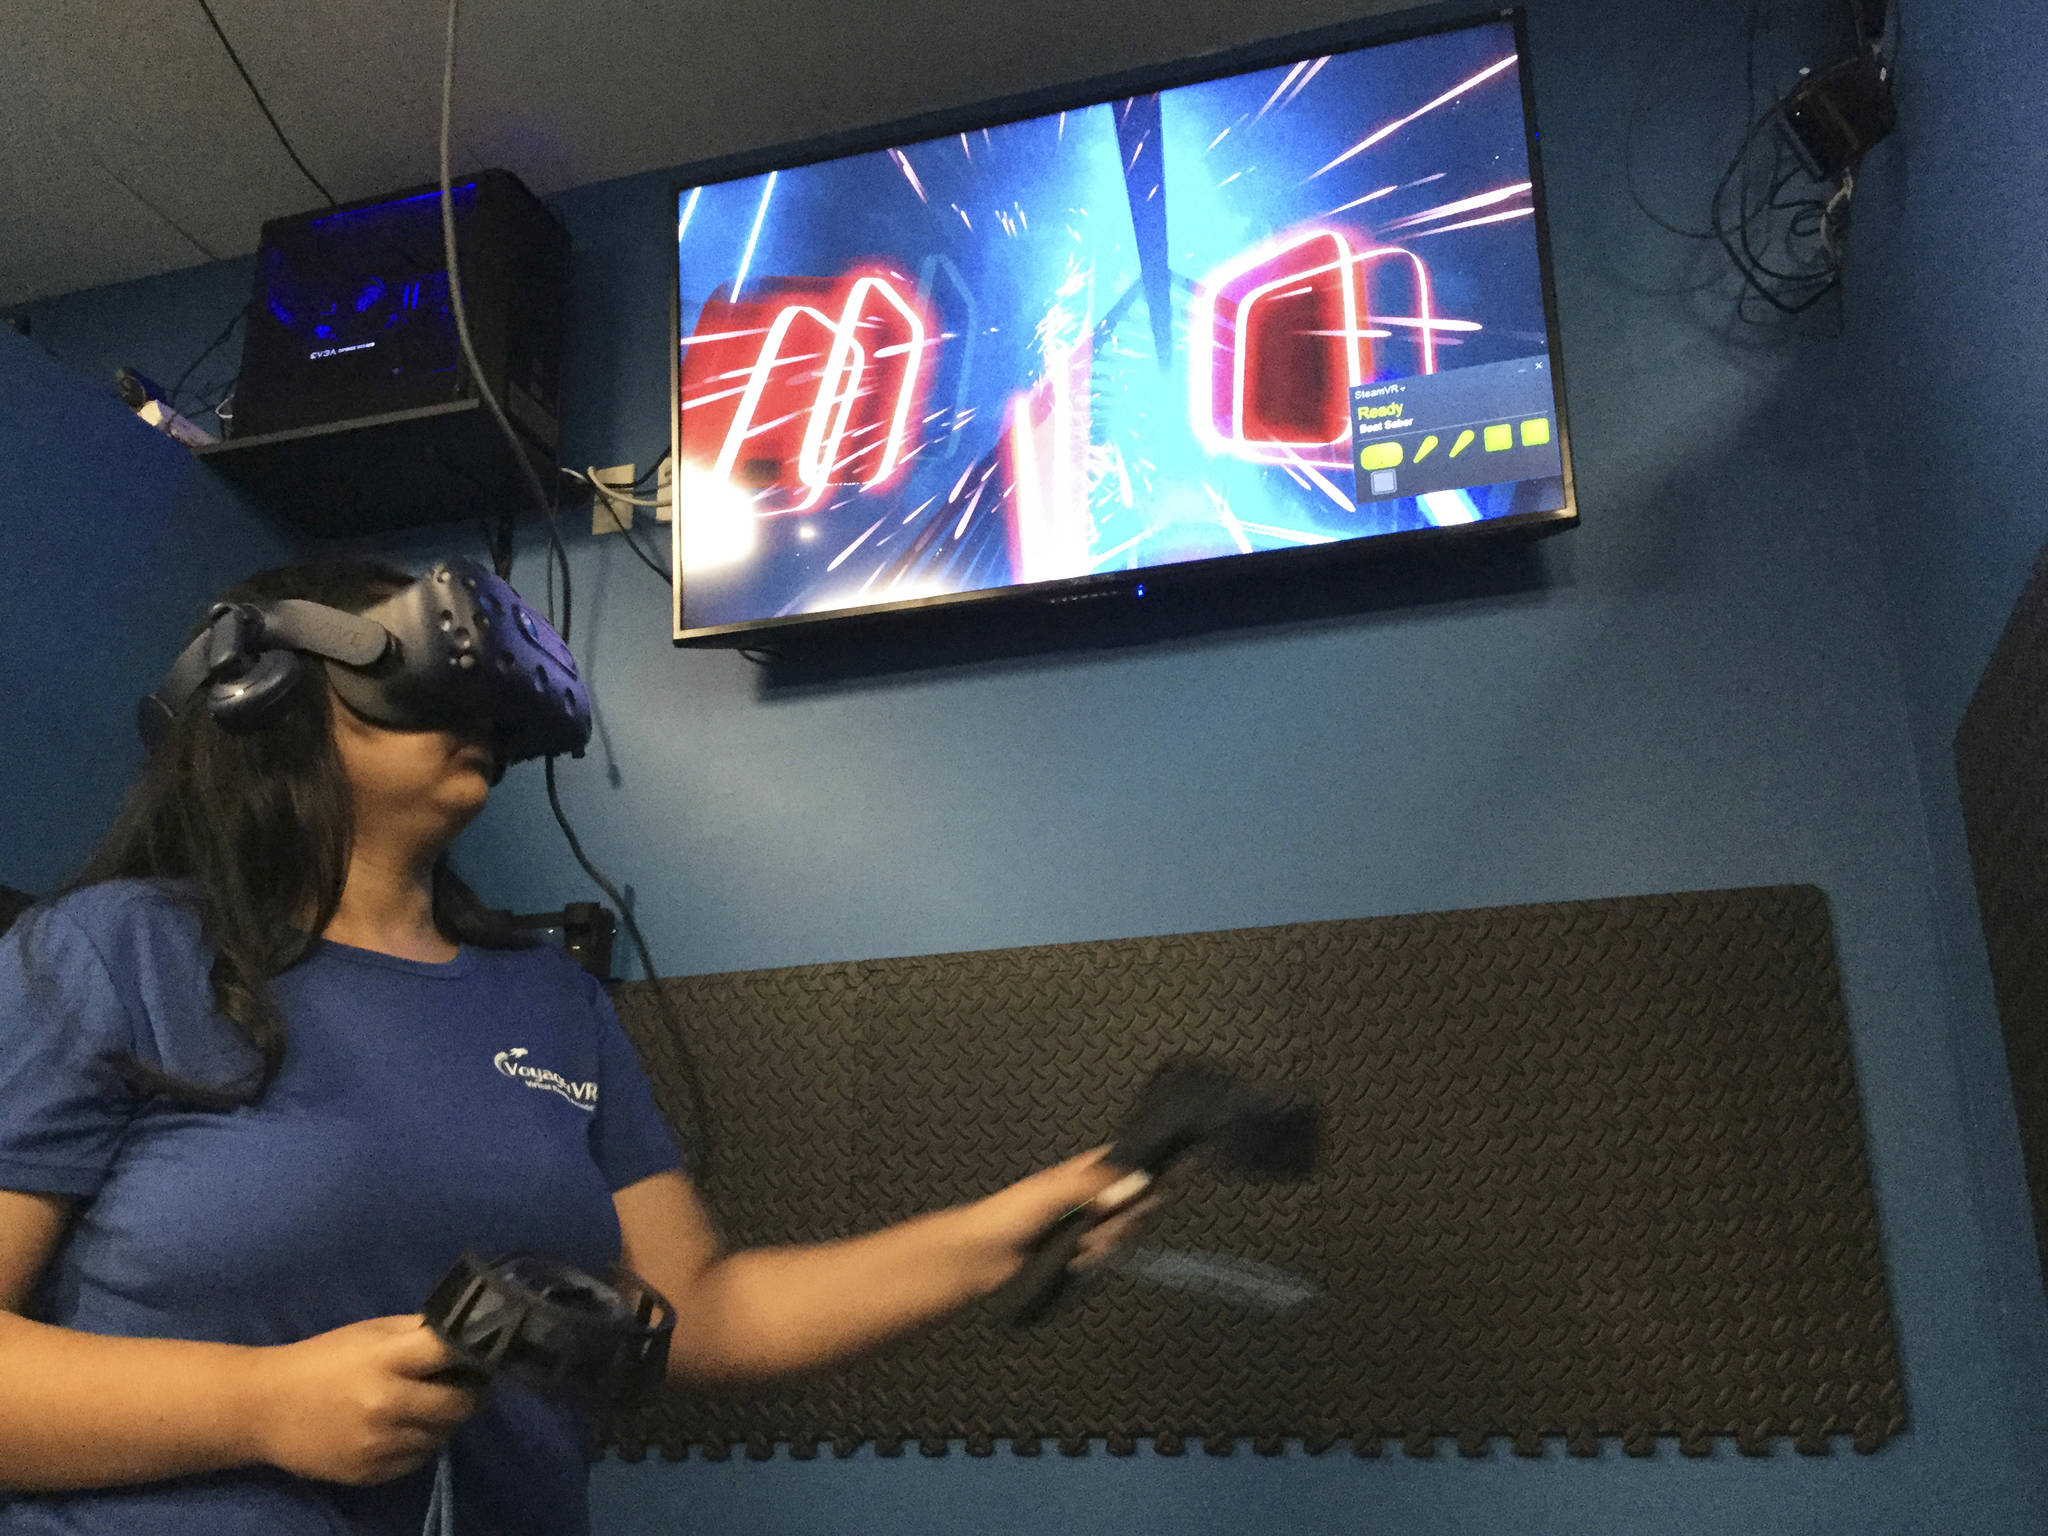 The VR revolution comes to Snohomish County: VoyagerVR, county’s first arcade, brings virtual reality experience to Smokey Point